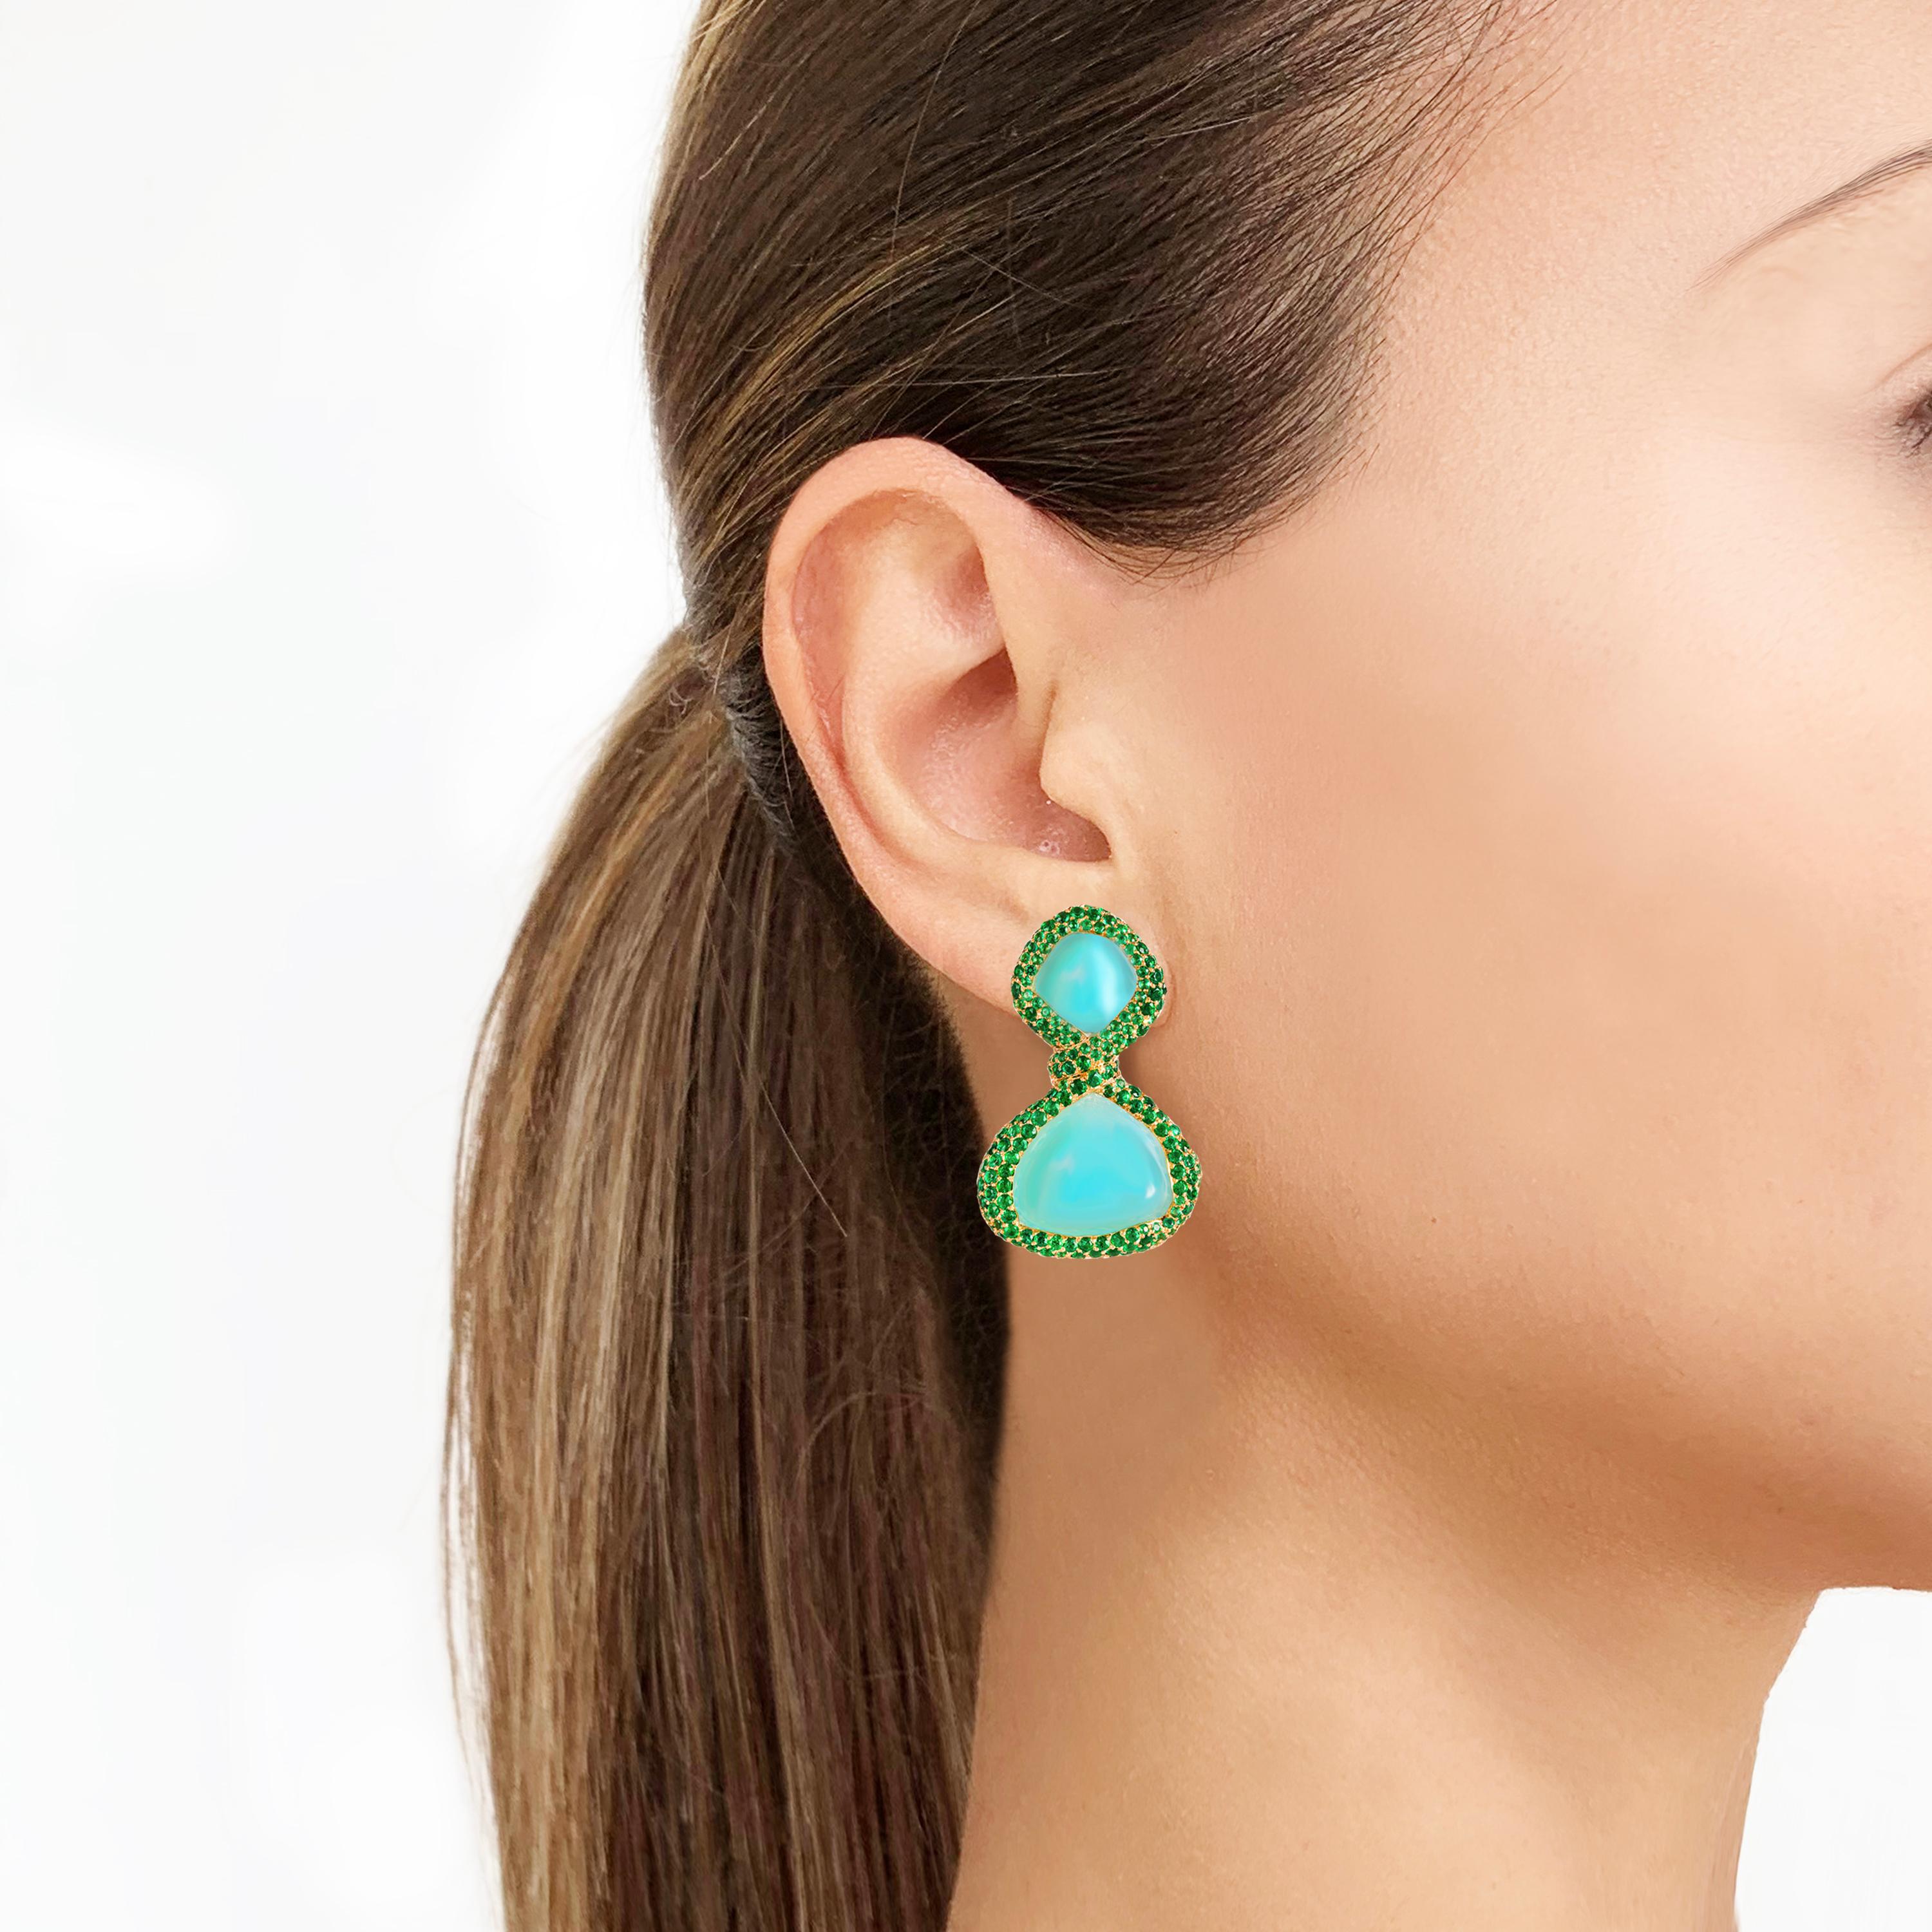 A Rosior Contemporary design, these earrings are made in 19.2K Yellow Gold on a beautiful mixture of green colors. The earrings are set with:
- 2 